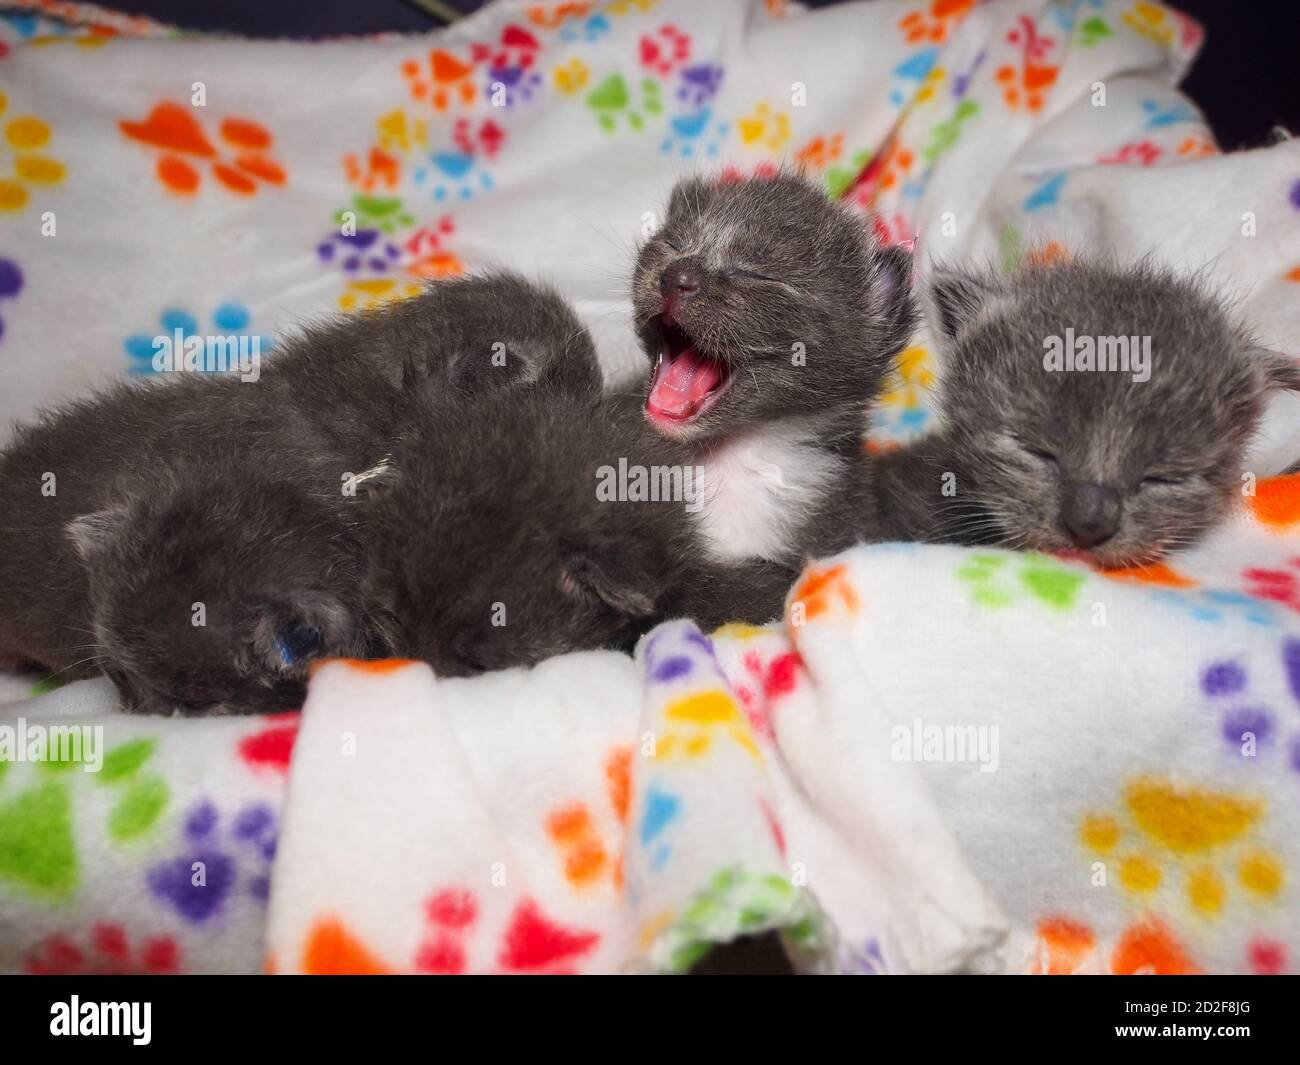 A one-week-old kitten lifts his head from the kitten pile to meow, mouth wide open. Stock Photo